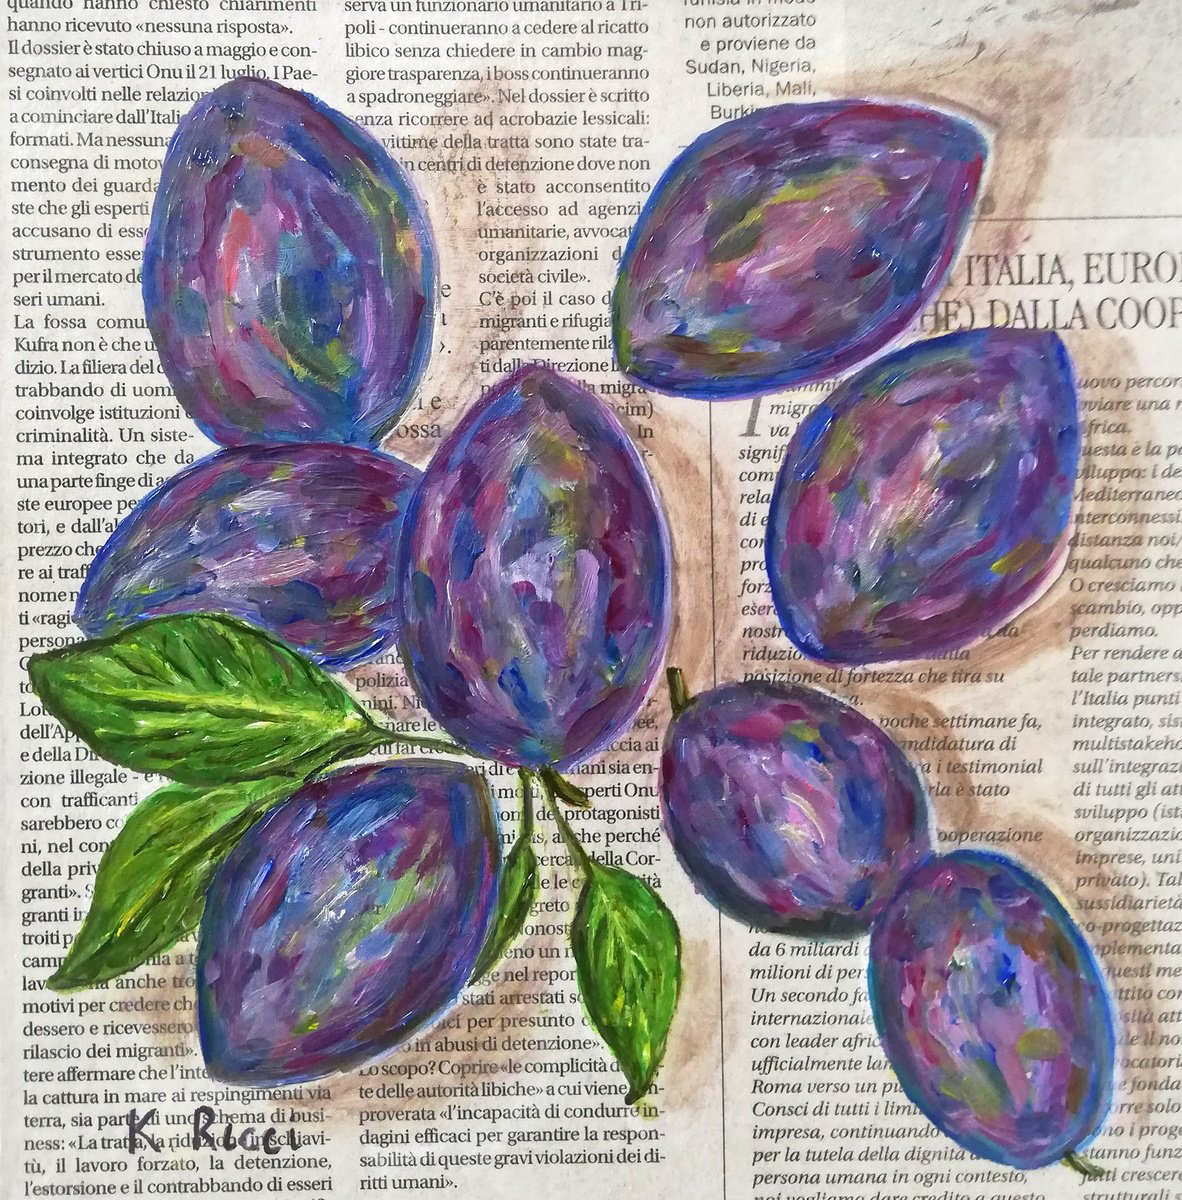 Plums on Newspaper Original Oil on Wooden Board Painting 8 by 8(20x20cm) by Katia Ricci